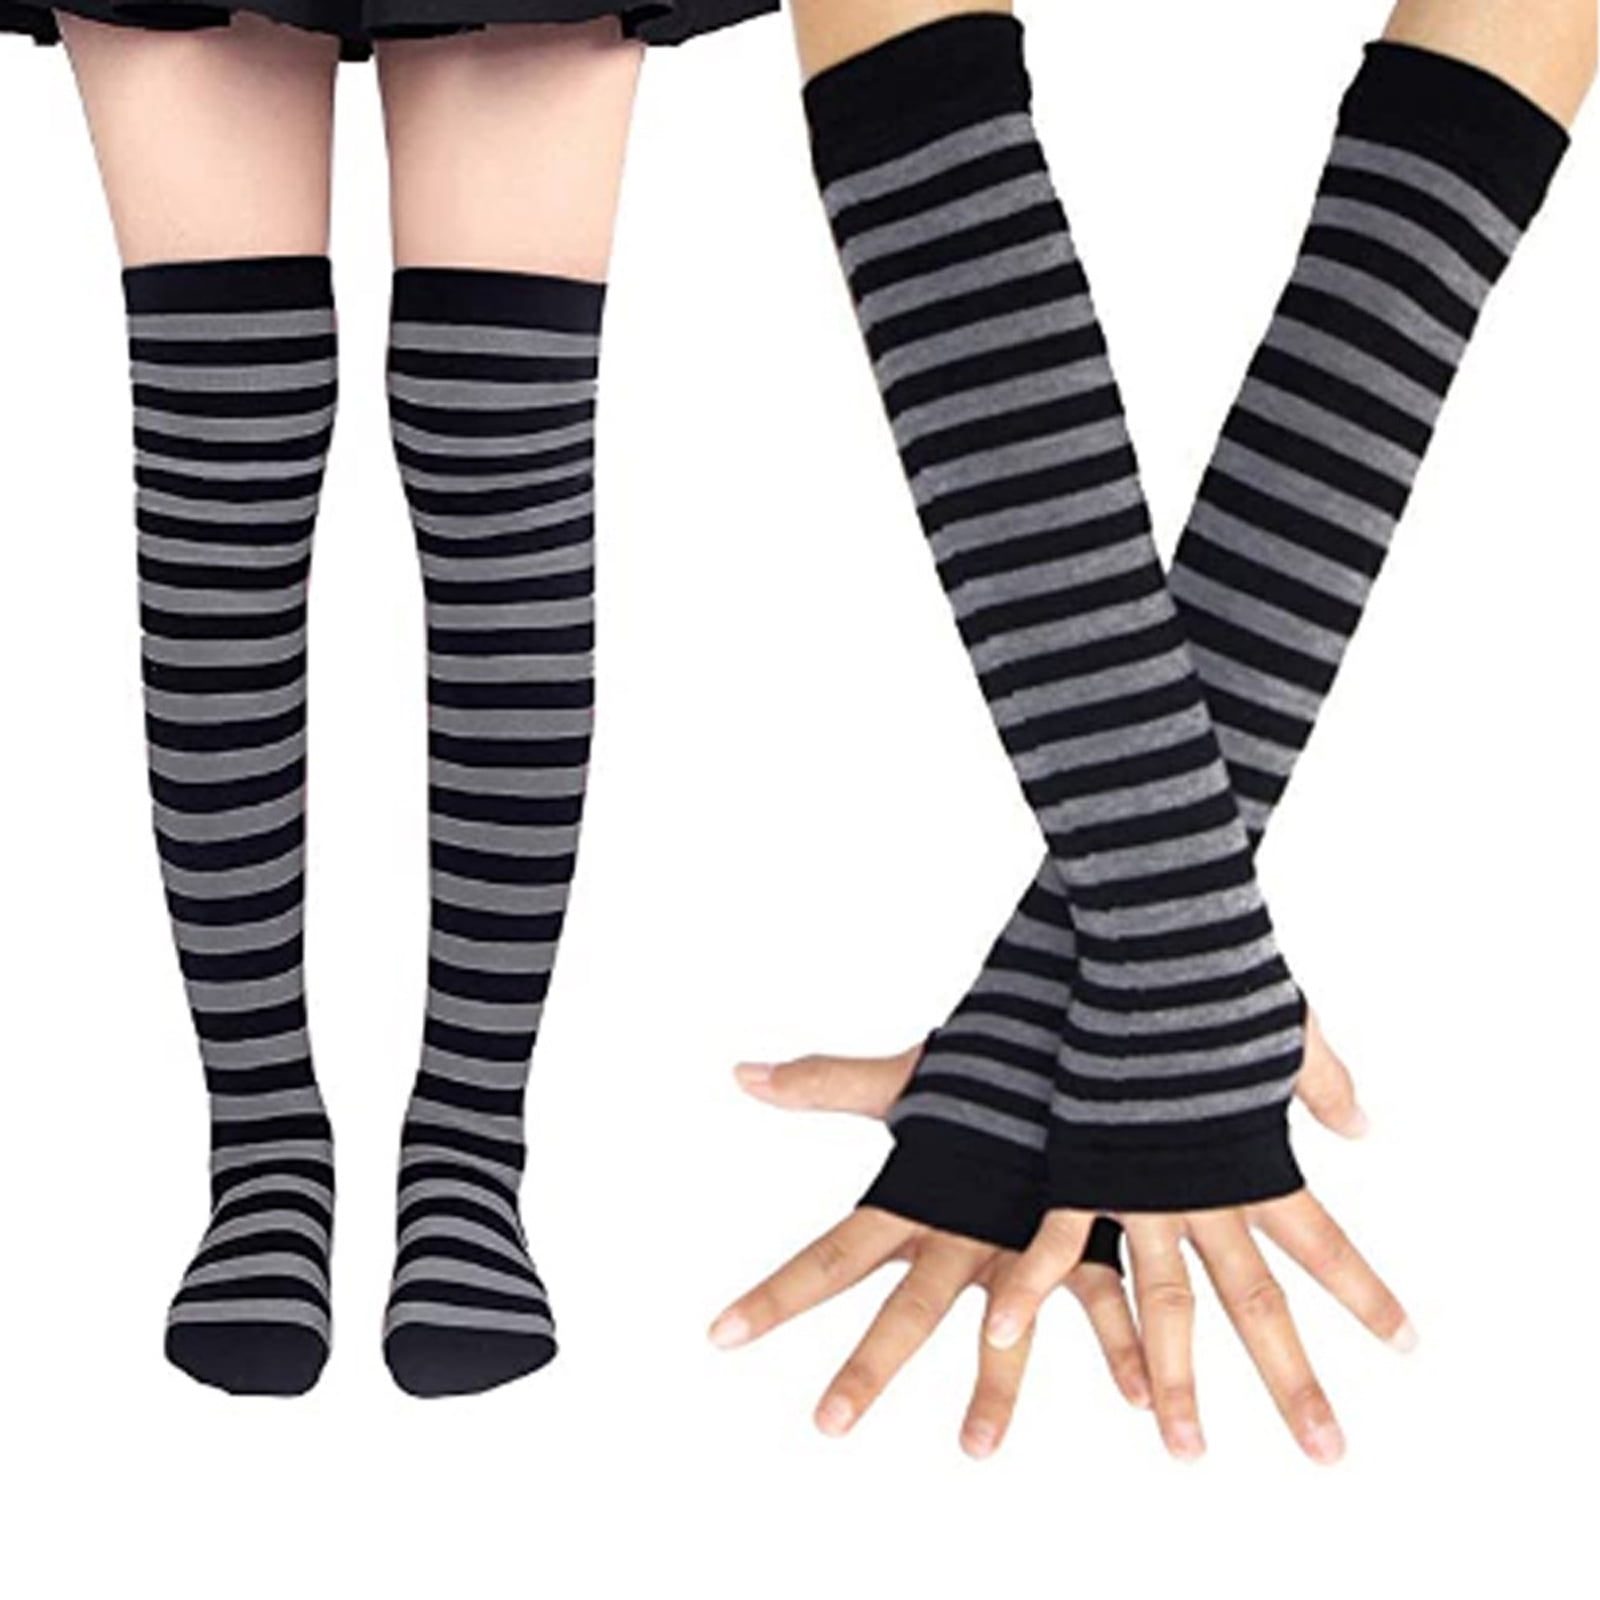 Women's Striped Thigh High Over The Knee Stockings Extra Long Opaque Cotton Sock 